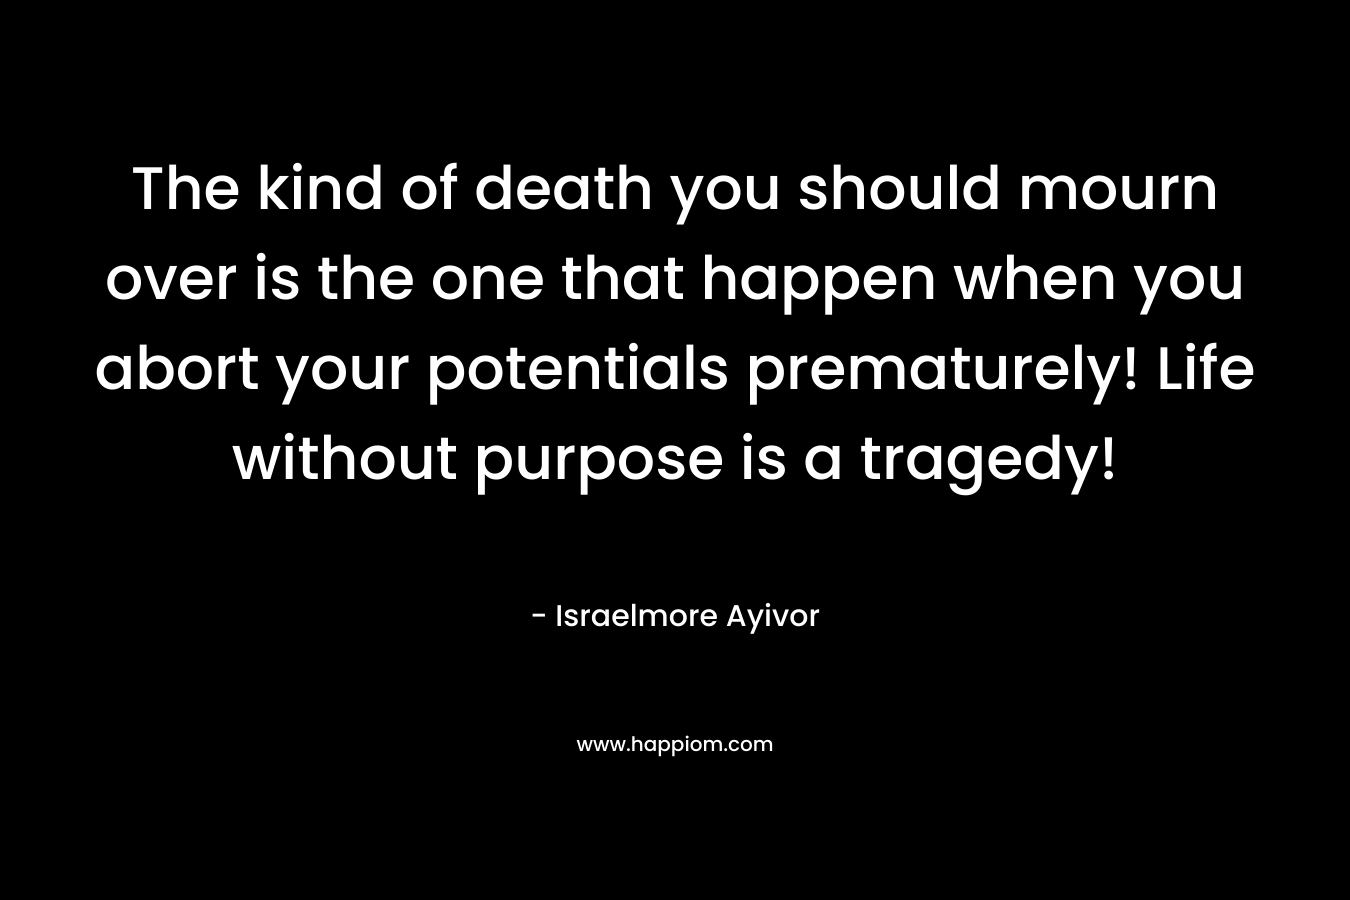 The kind of death you should mourn over is the one that happen when you abort your potentials prematurely! Life without purpose is a tragedy!